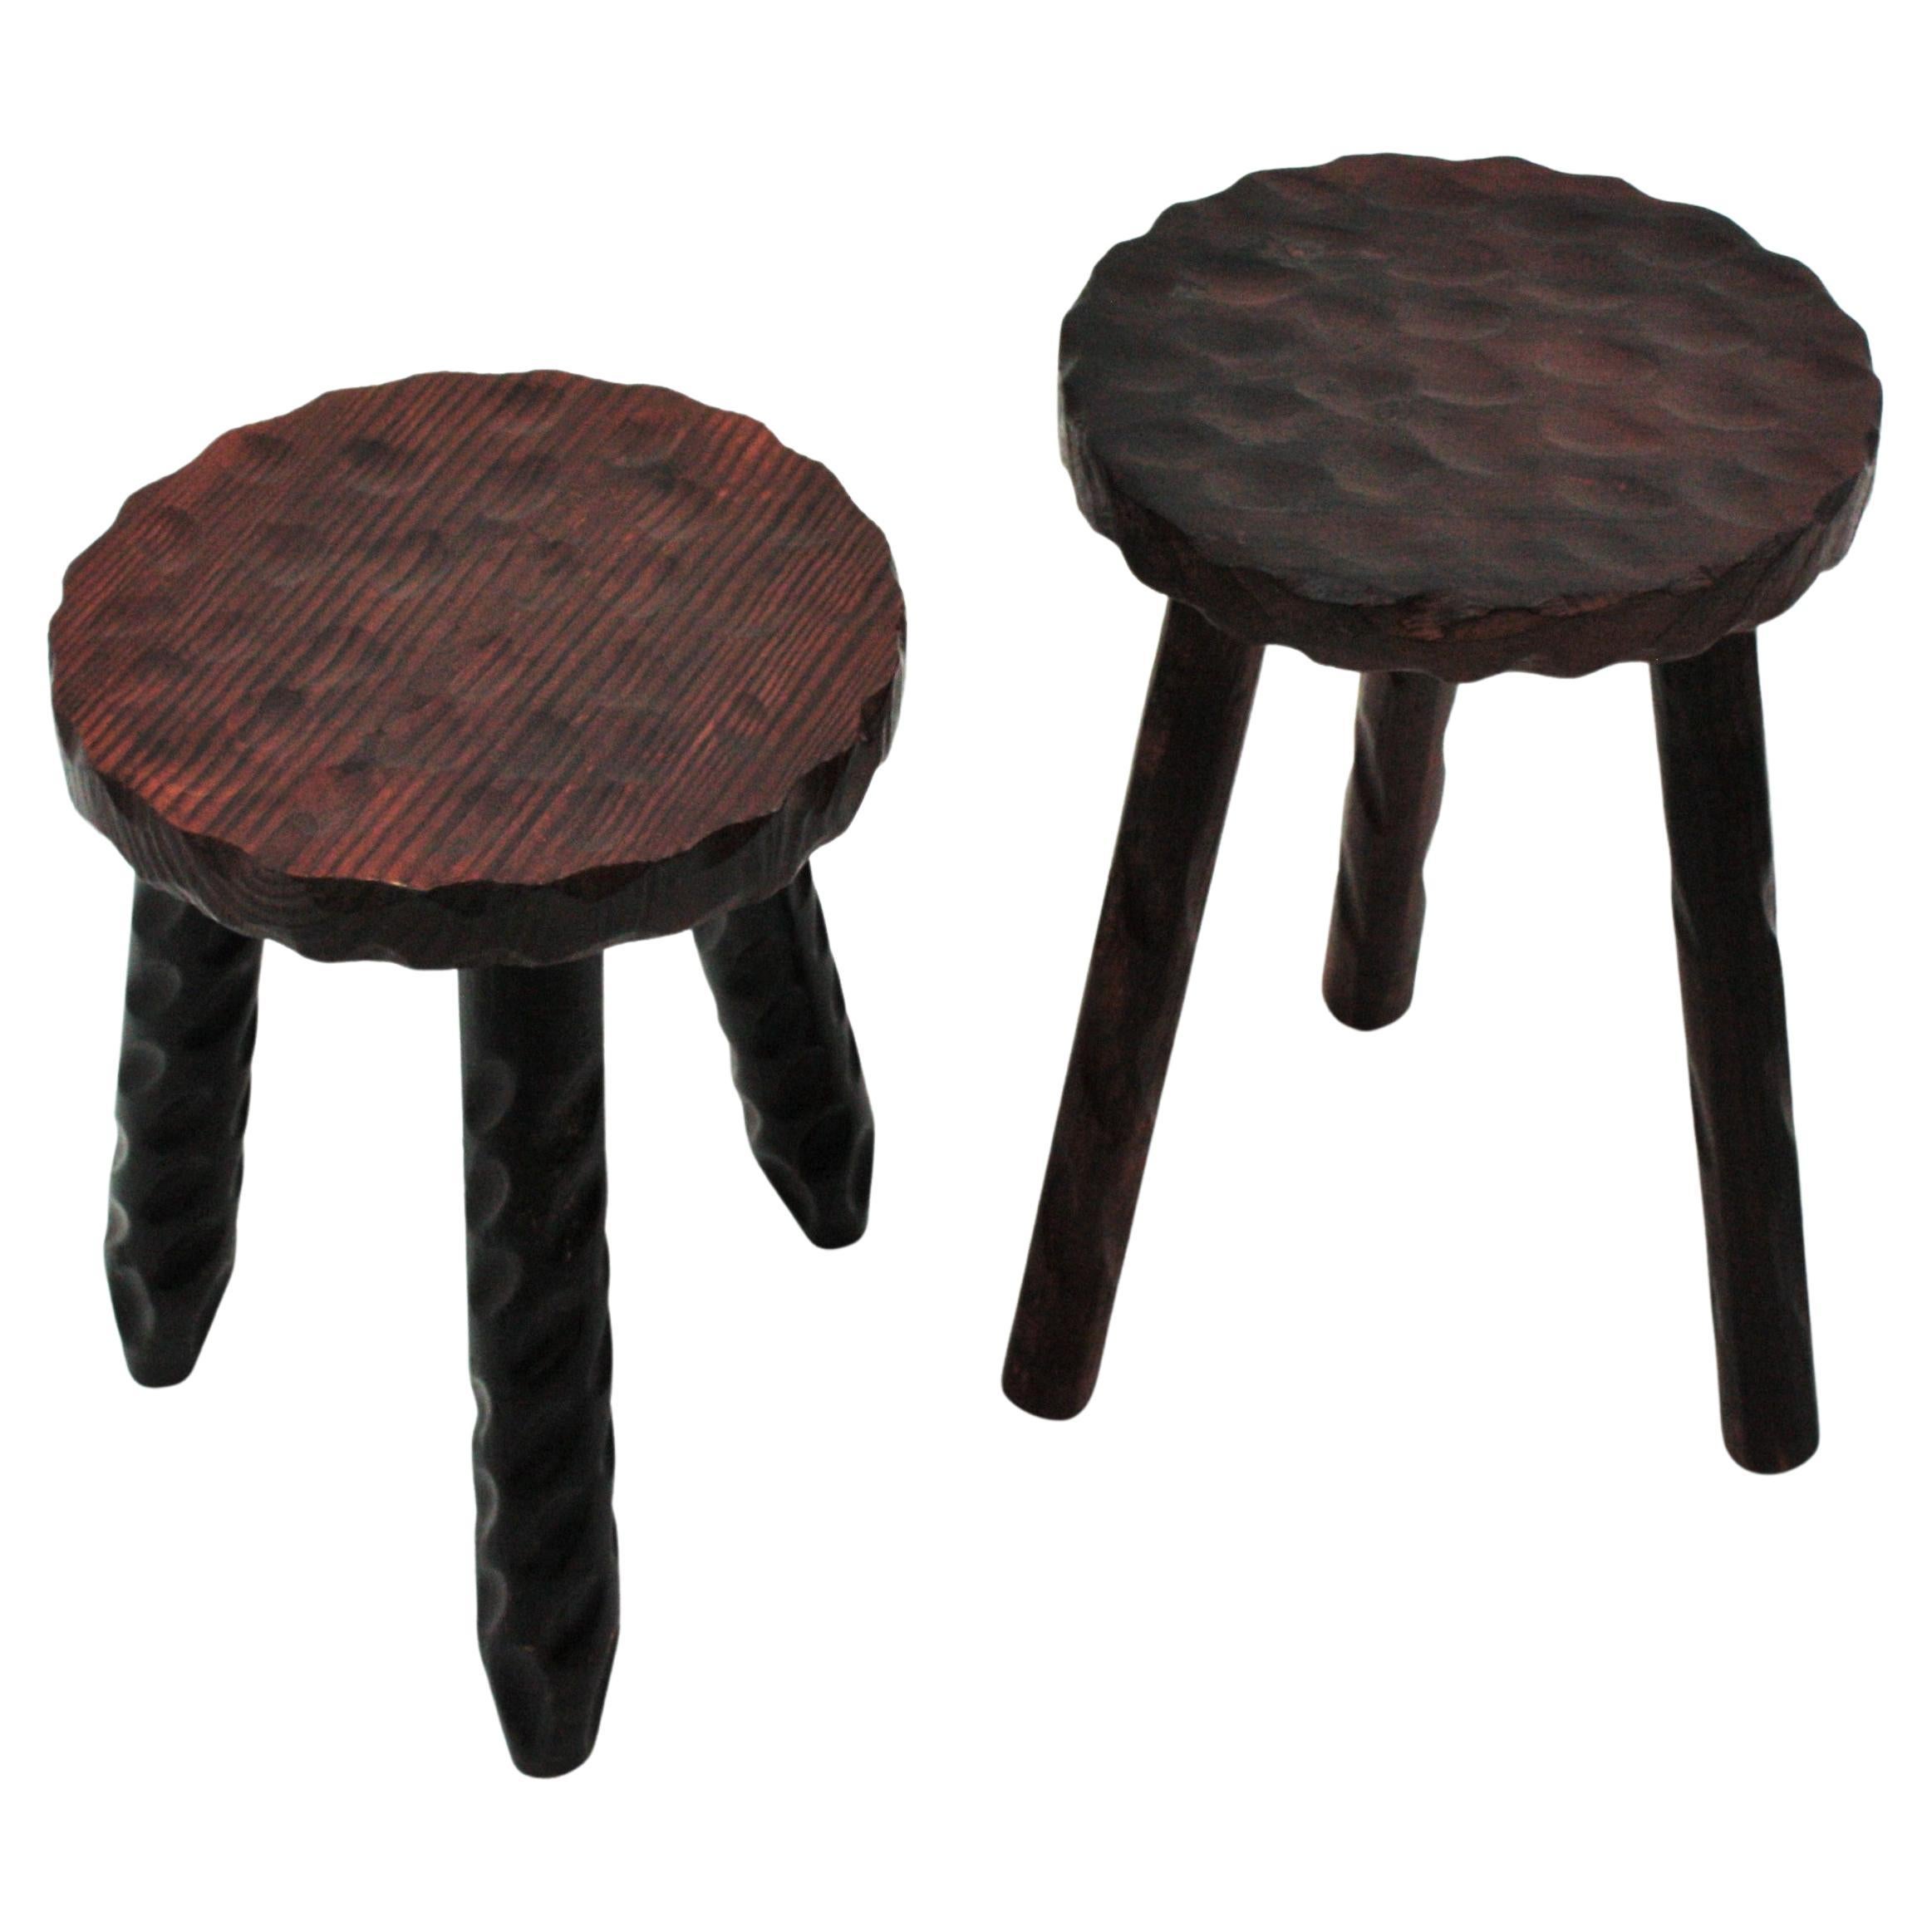 Pair of Spanish Colonial Tripod Stools in Carved Wood, 1940s